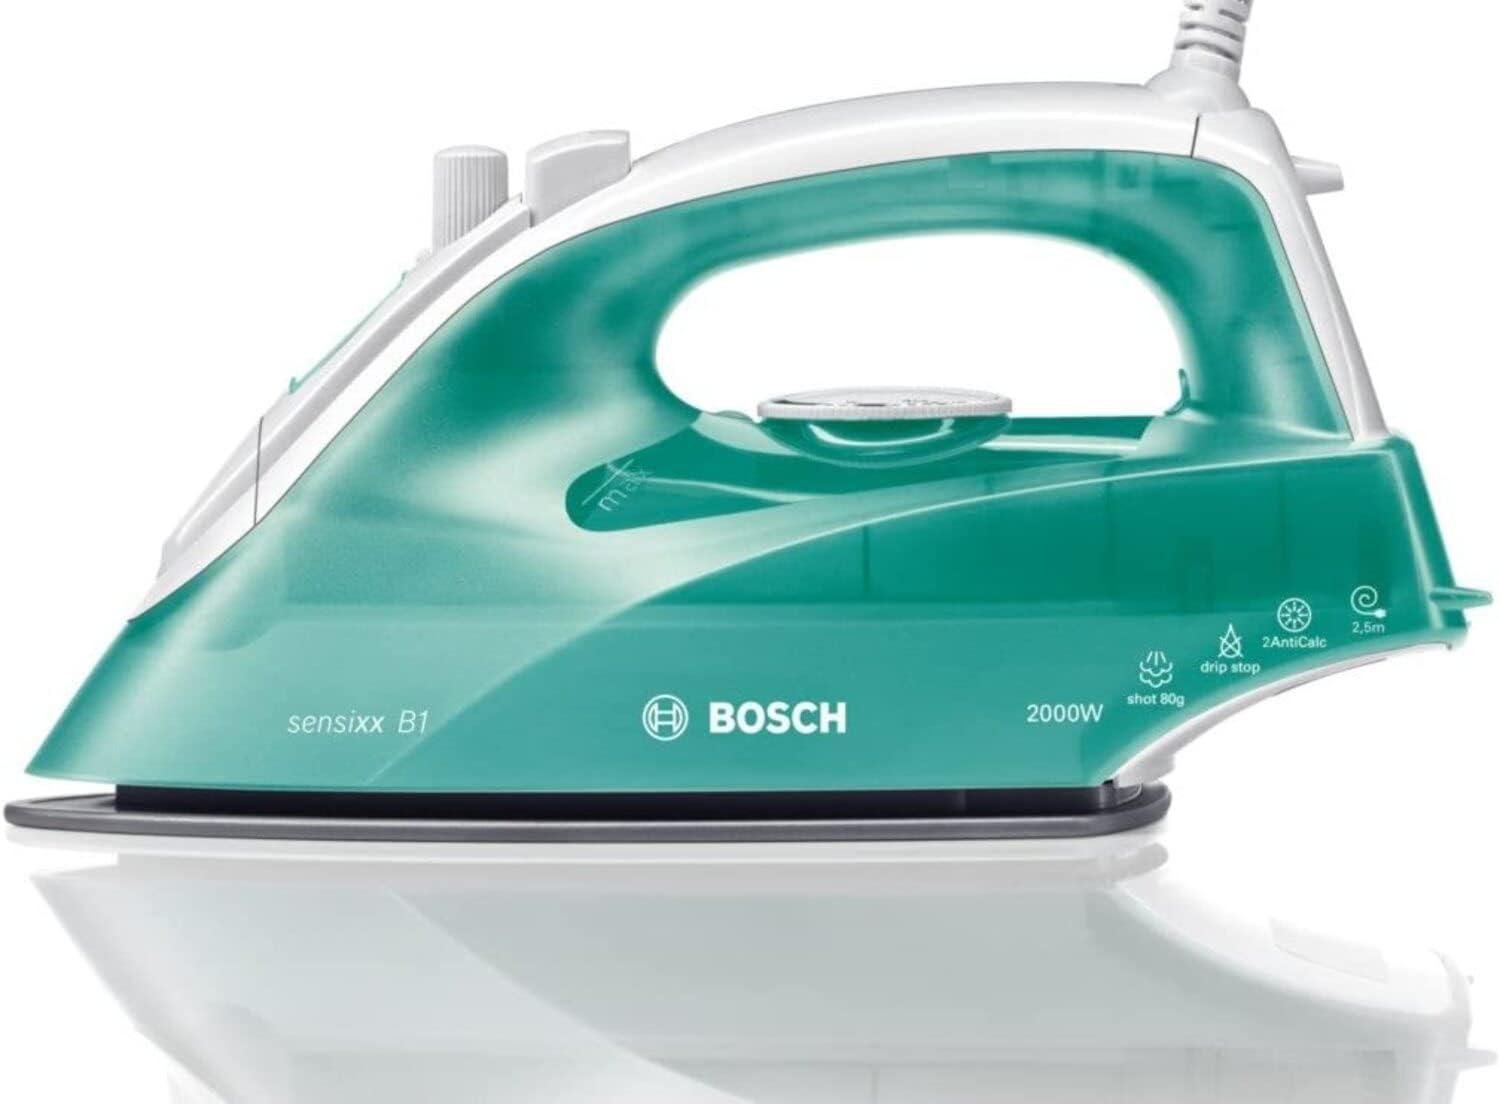 Bosch Steam Iron TDA2301GB with Spray Function - 2000W Easy to Store and Clean